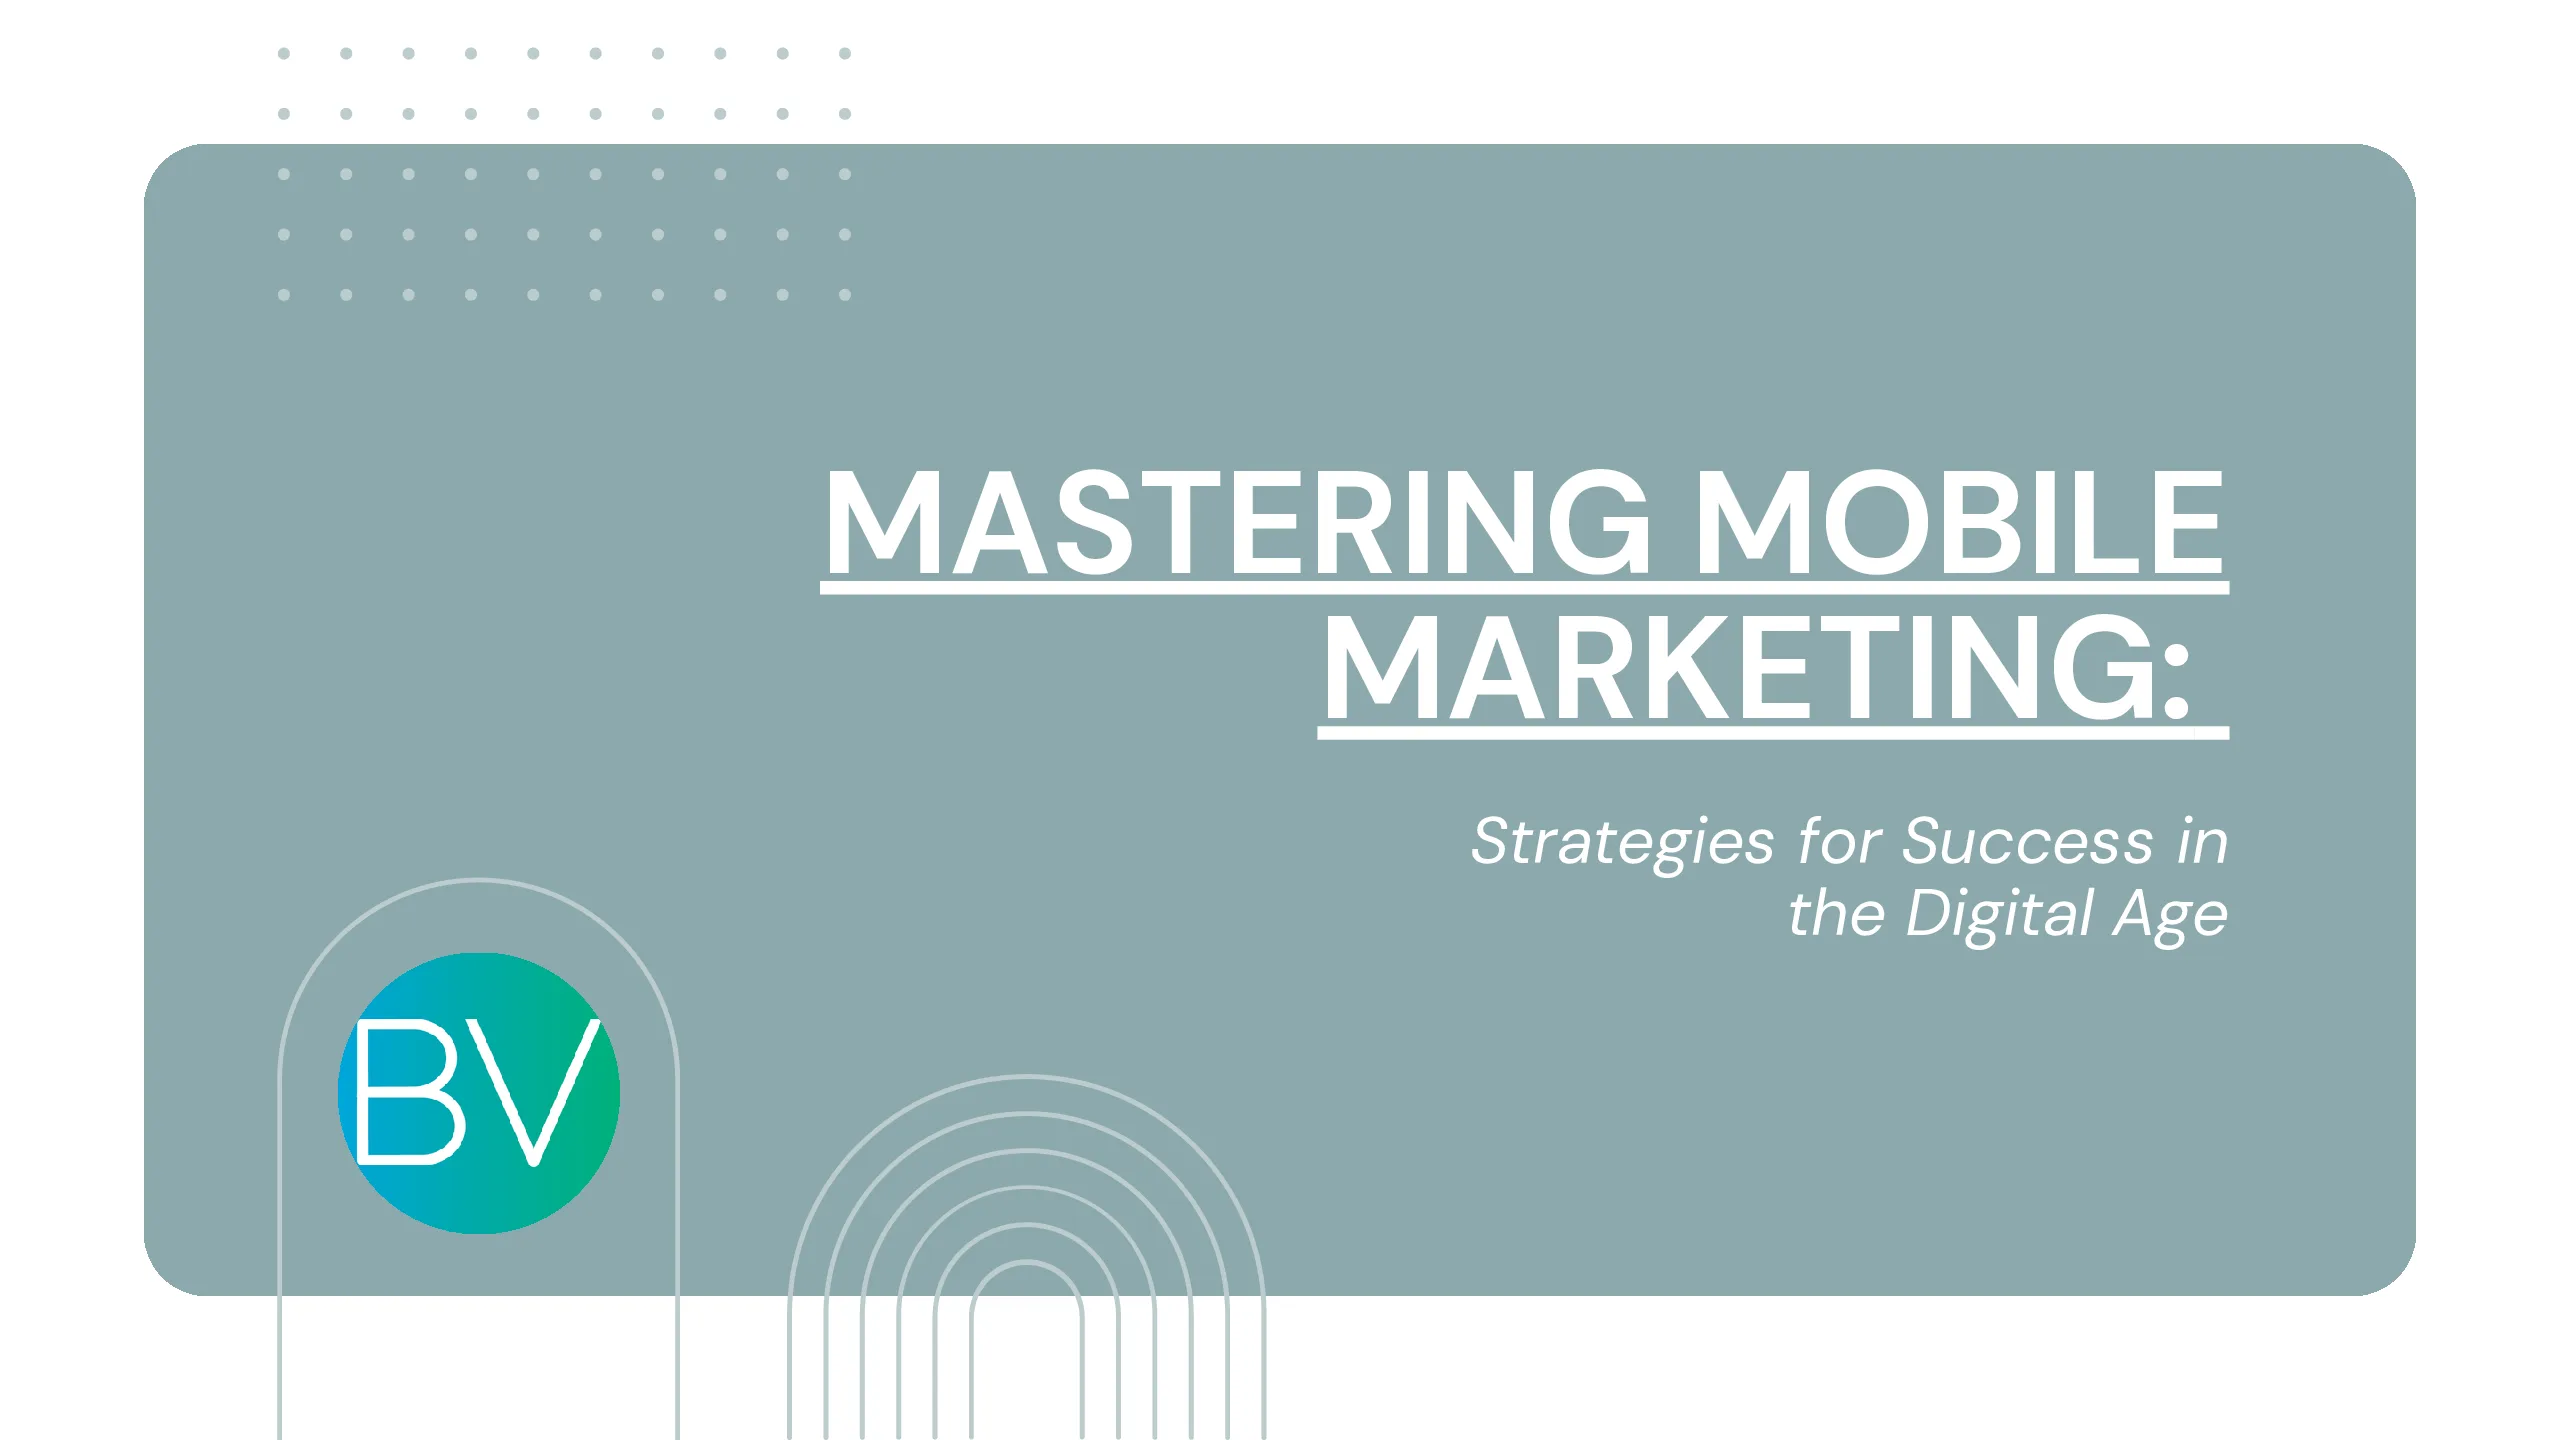 Mastering Mobile Marketing: Strategies for Success in the Digital Age